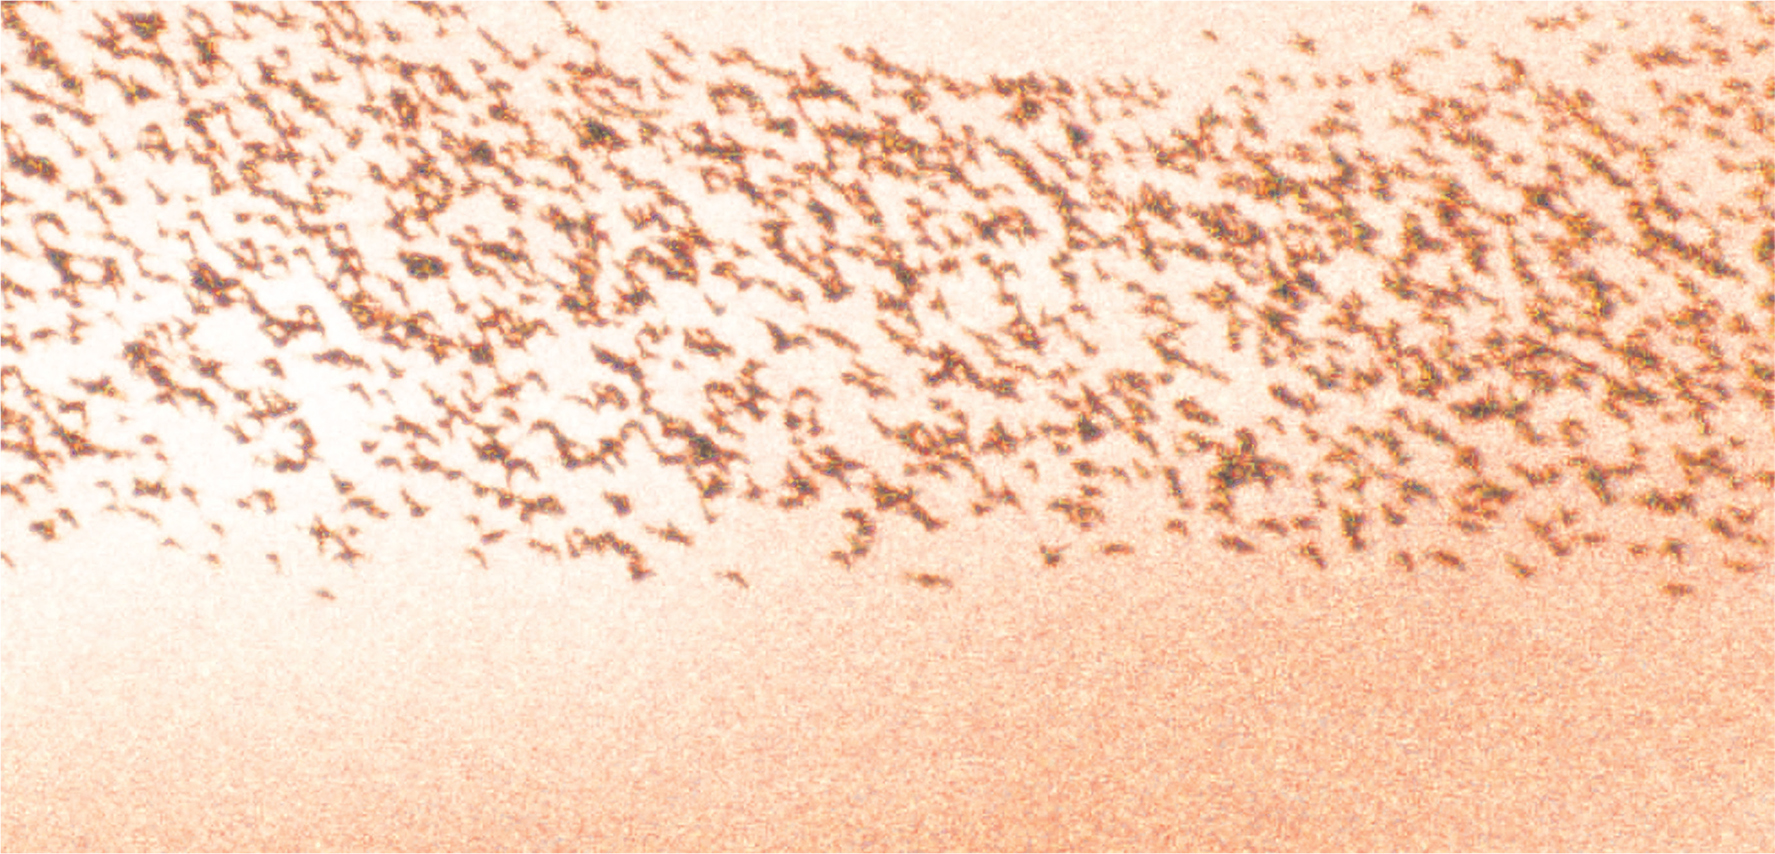 Flock of birds flying during a sunset. Image from the cover of Chloe Garcia Roberts's book, The Reveal.